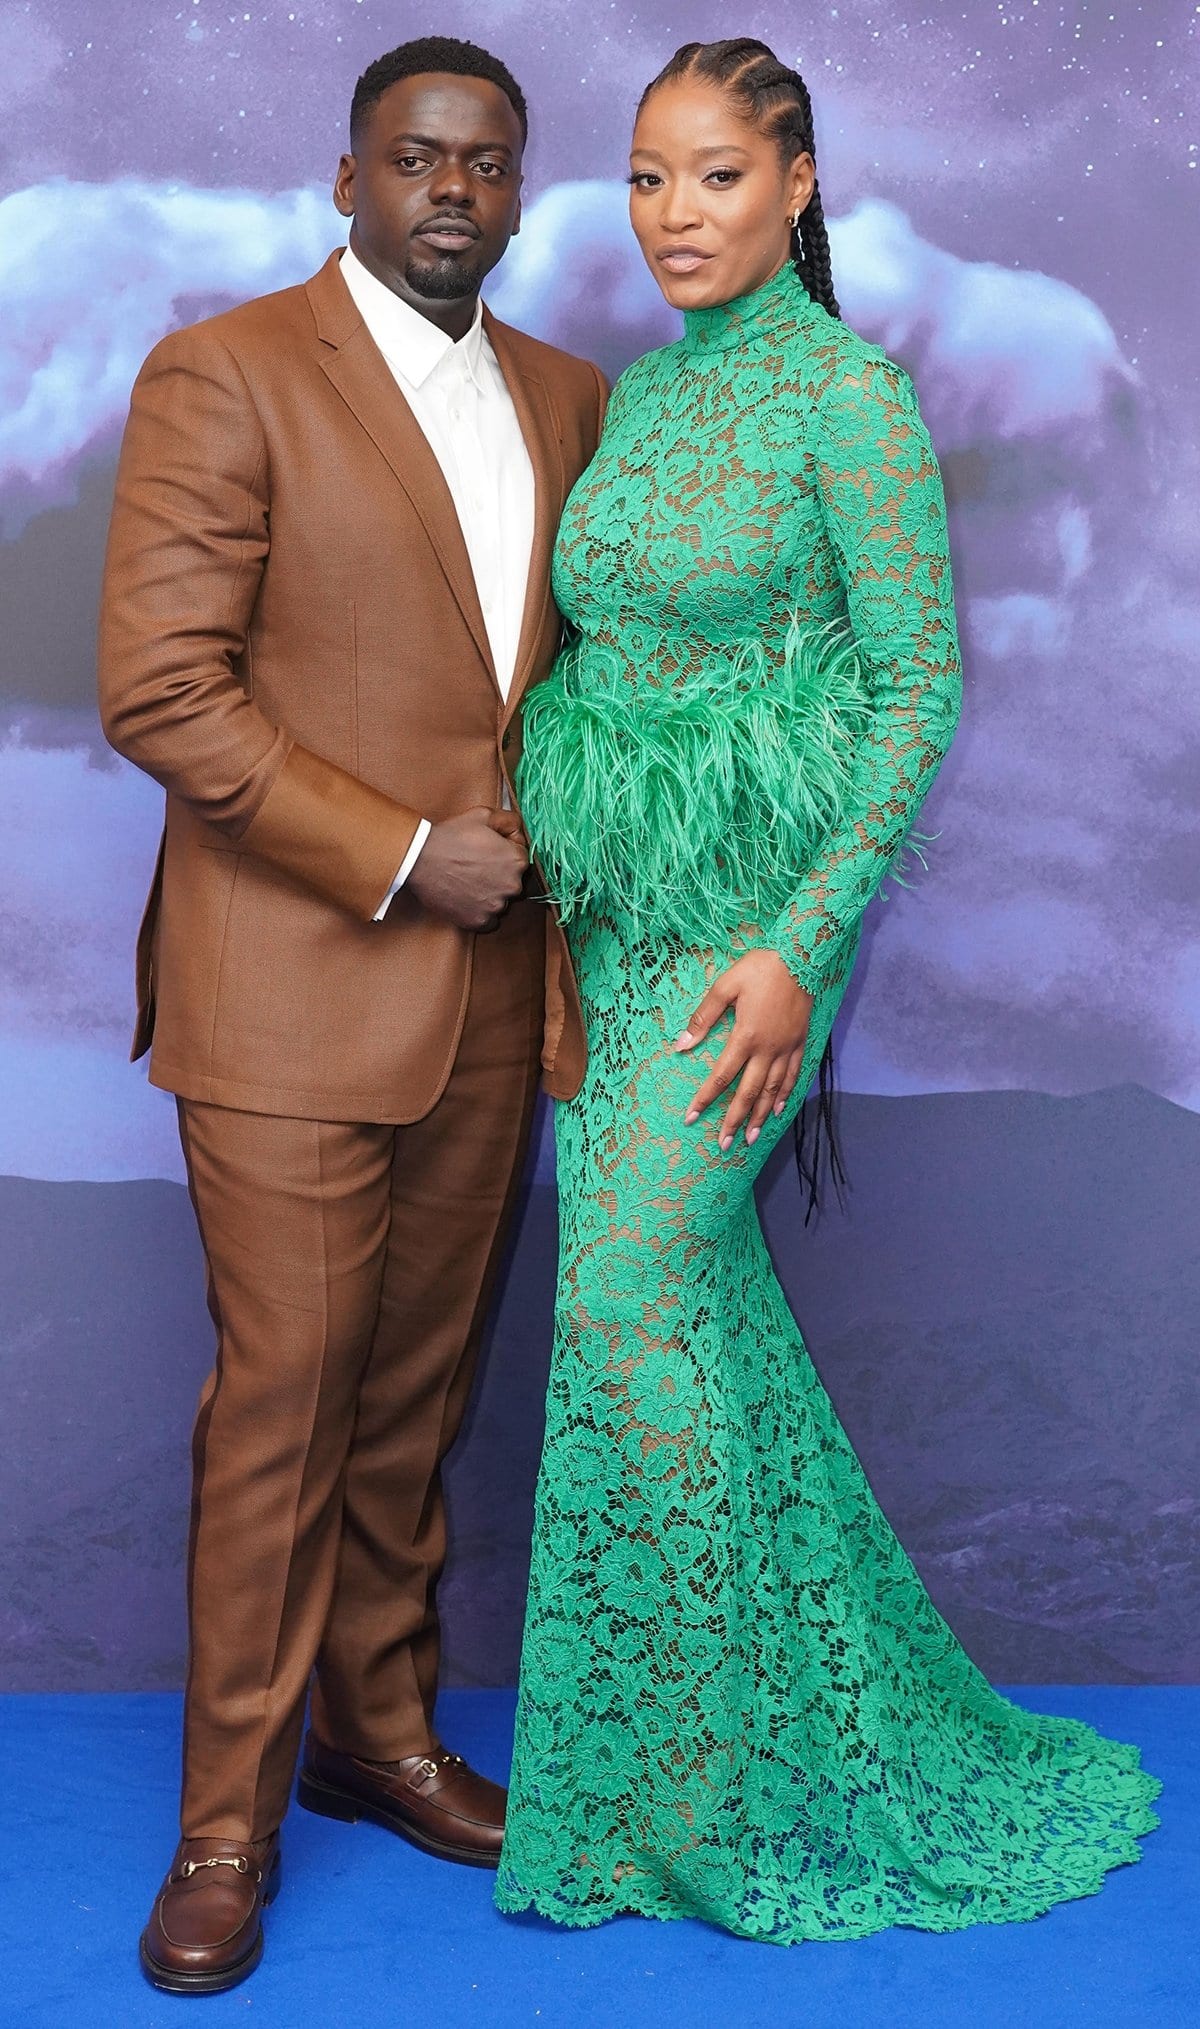 Keke Palmer in a green lace Valentino floor-length dress featuring feather boa waist trim poses with Daniel Kaluuya at the UK Premiere Of "NOPE"